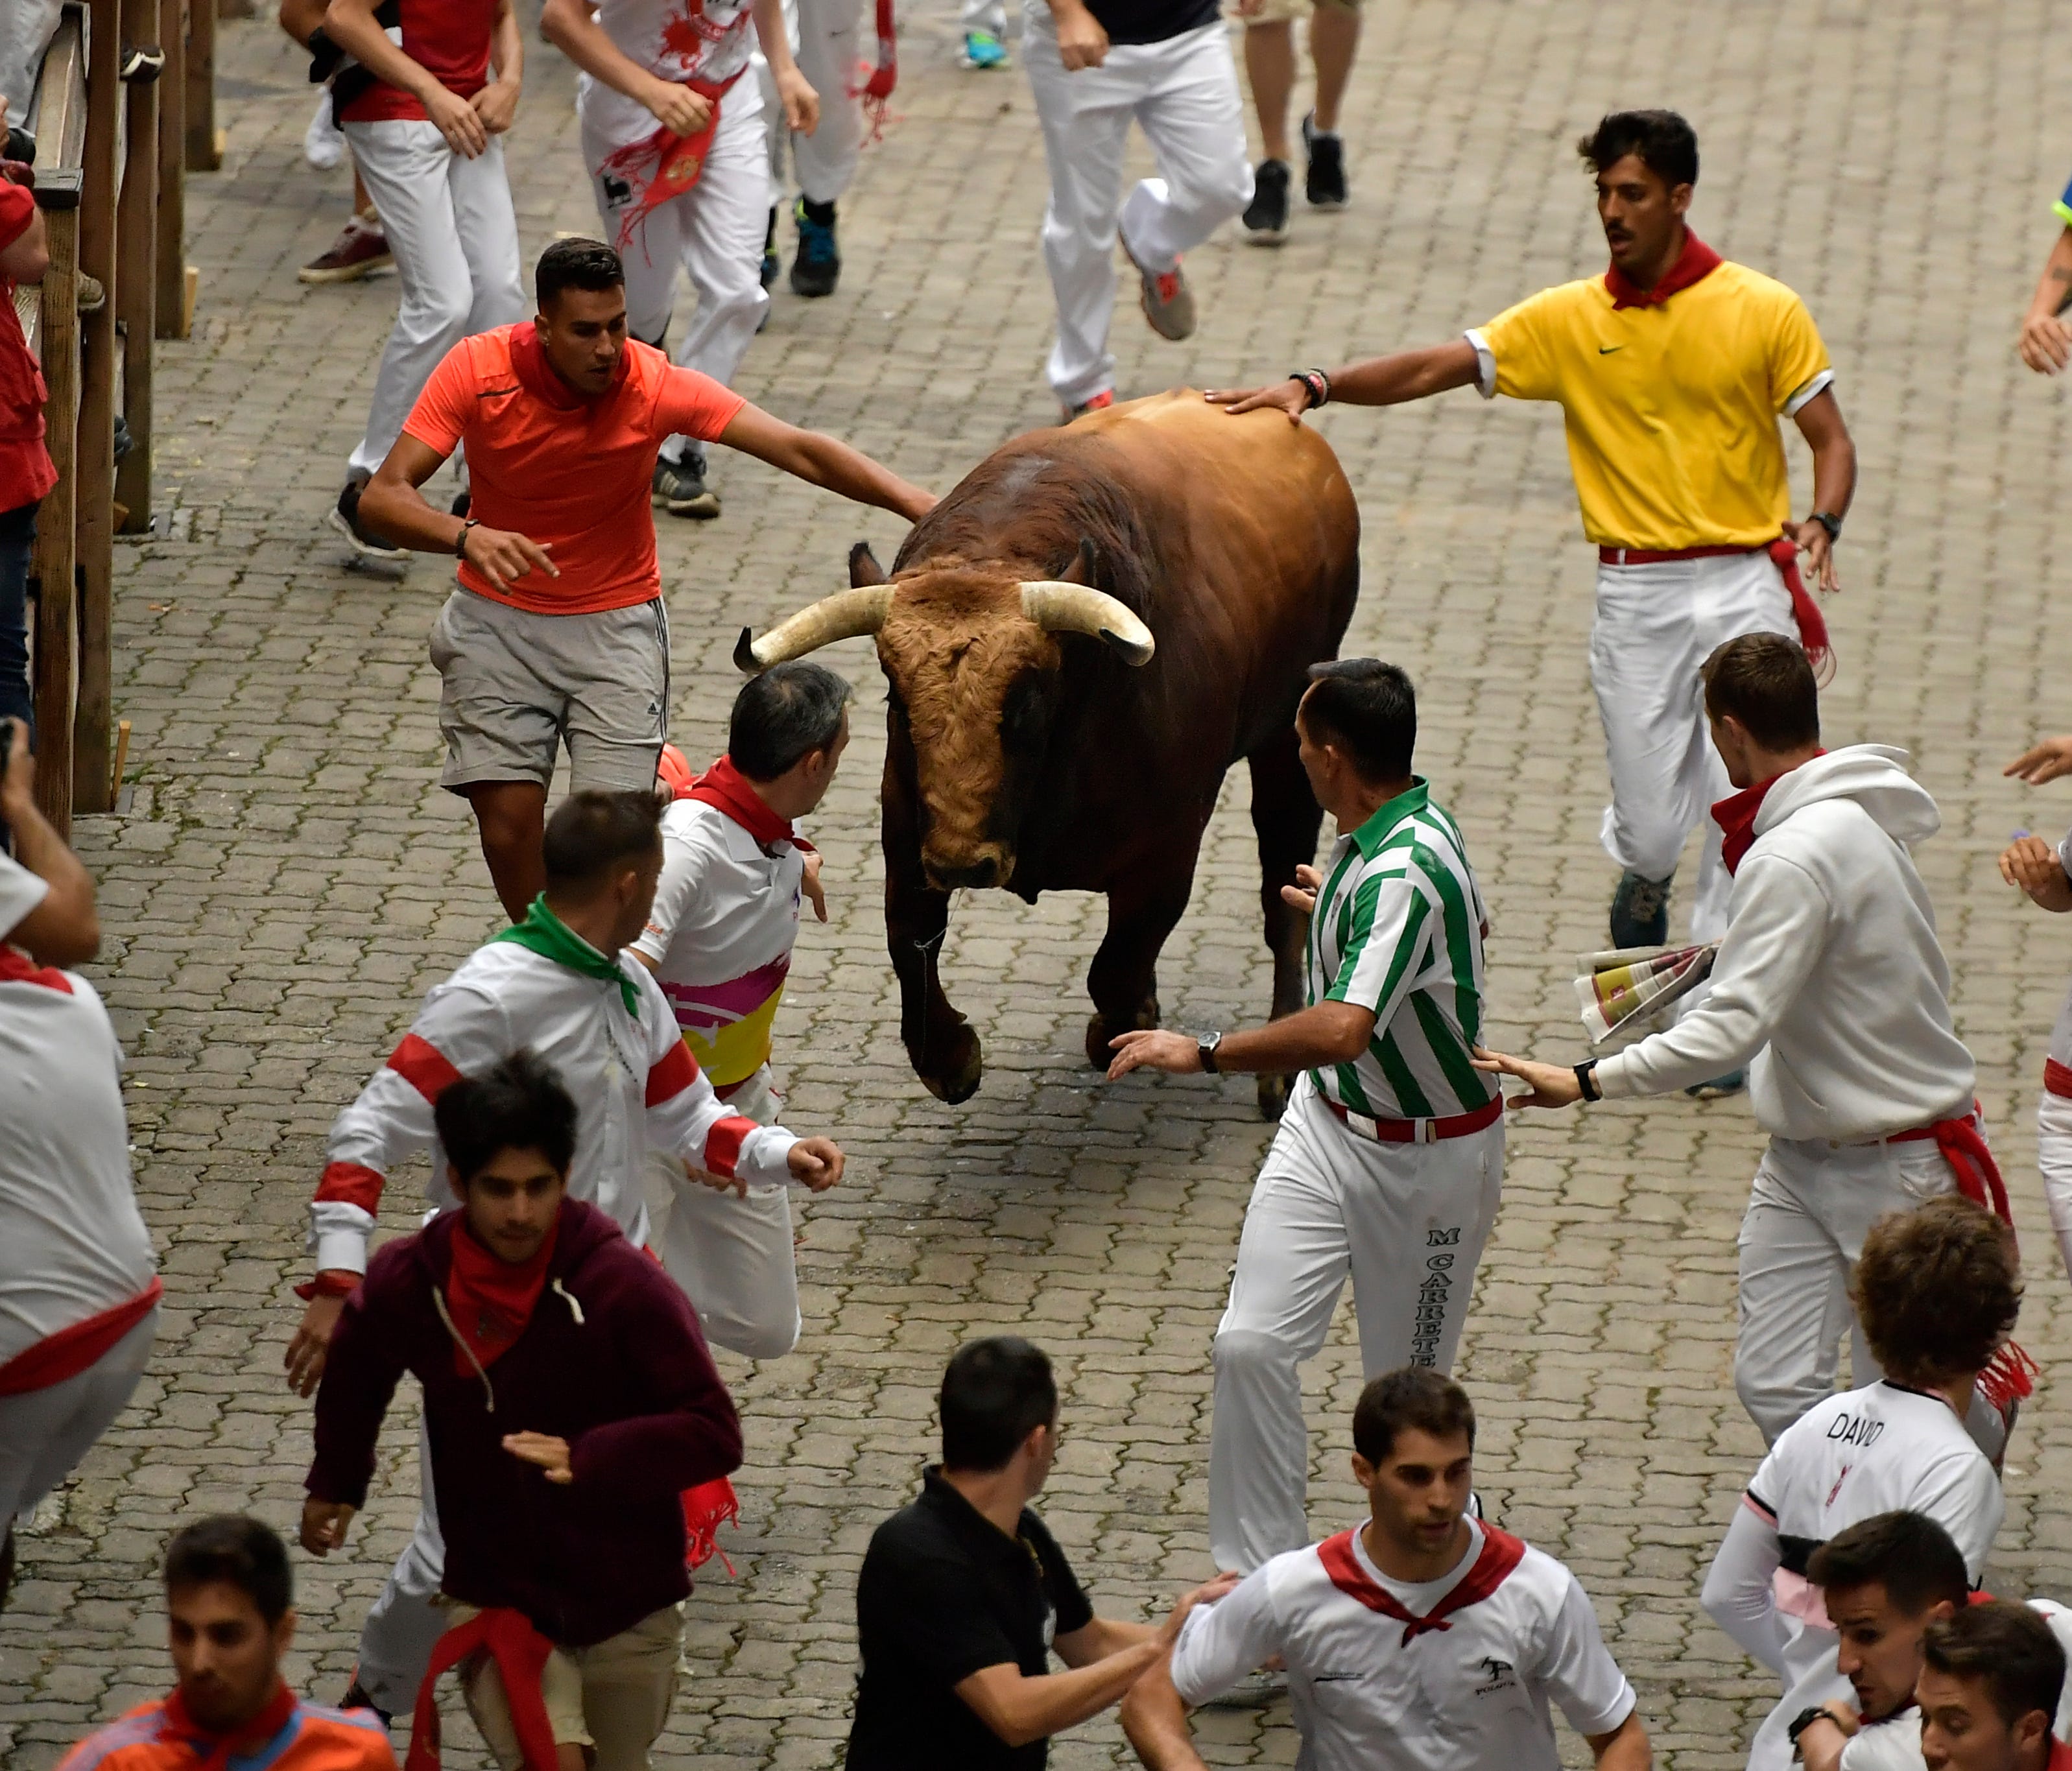 Revellers run in front of a Puerto de San Lorenzo fighting bull during the third running of the bulls at the San Fermin Festival, in Pamplona, Spain, on July 9, 2017. Revelers from around the world flock to Pamplona every year to take part in the eig